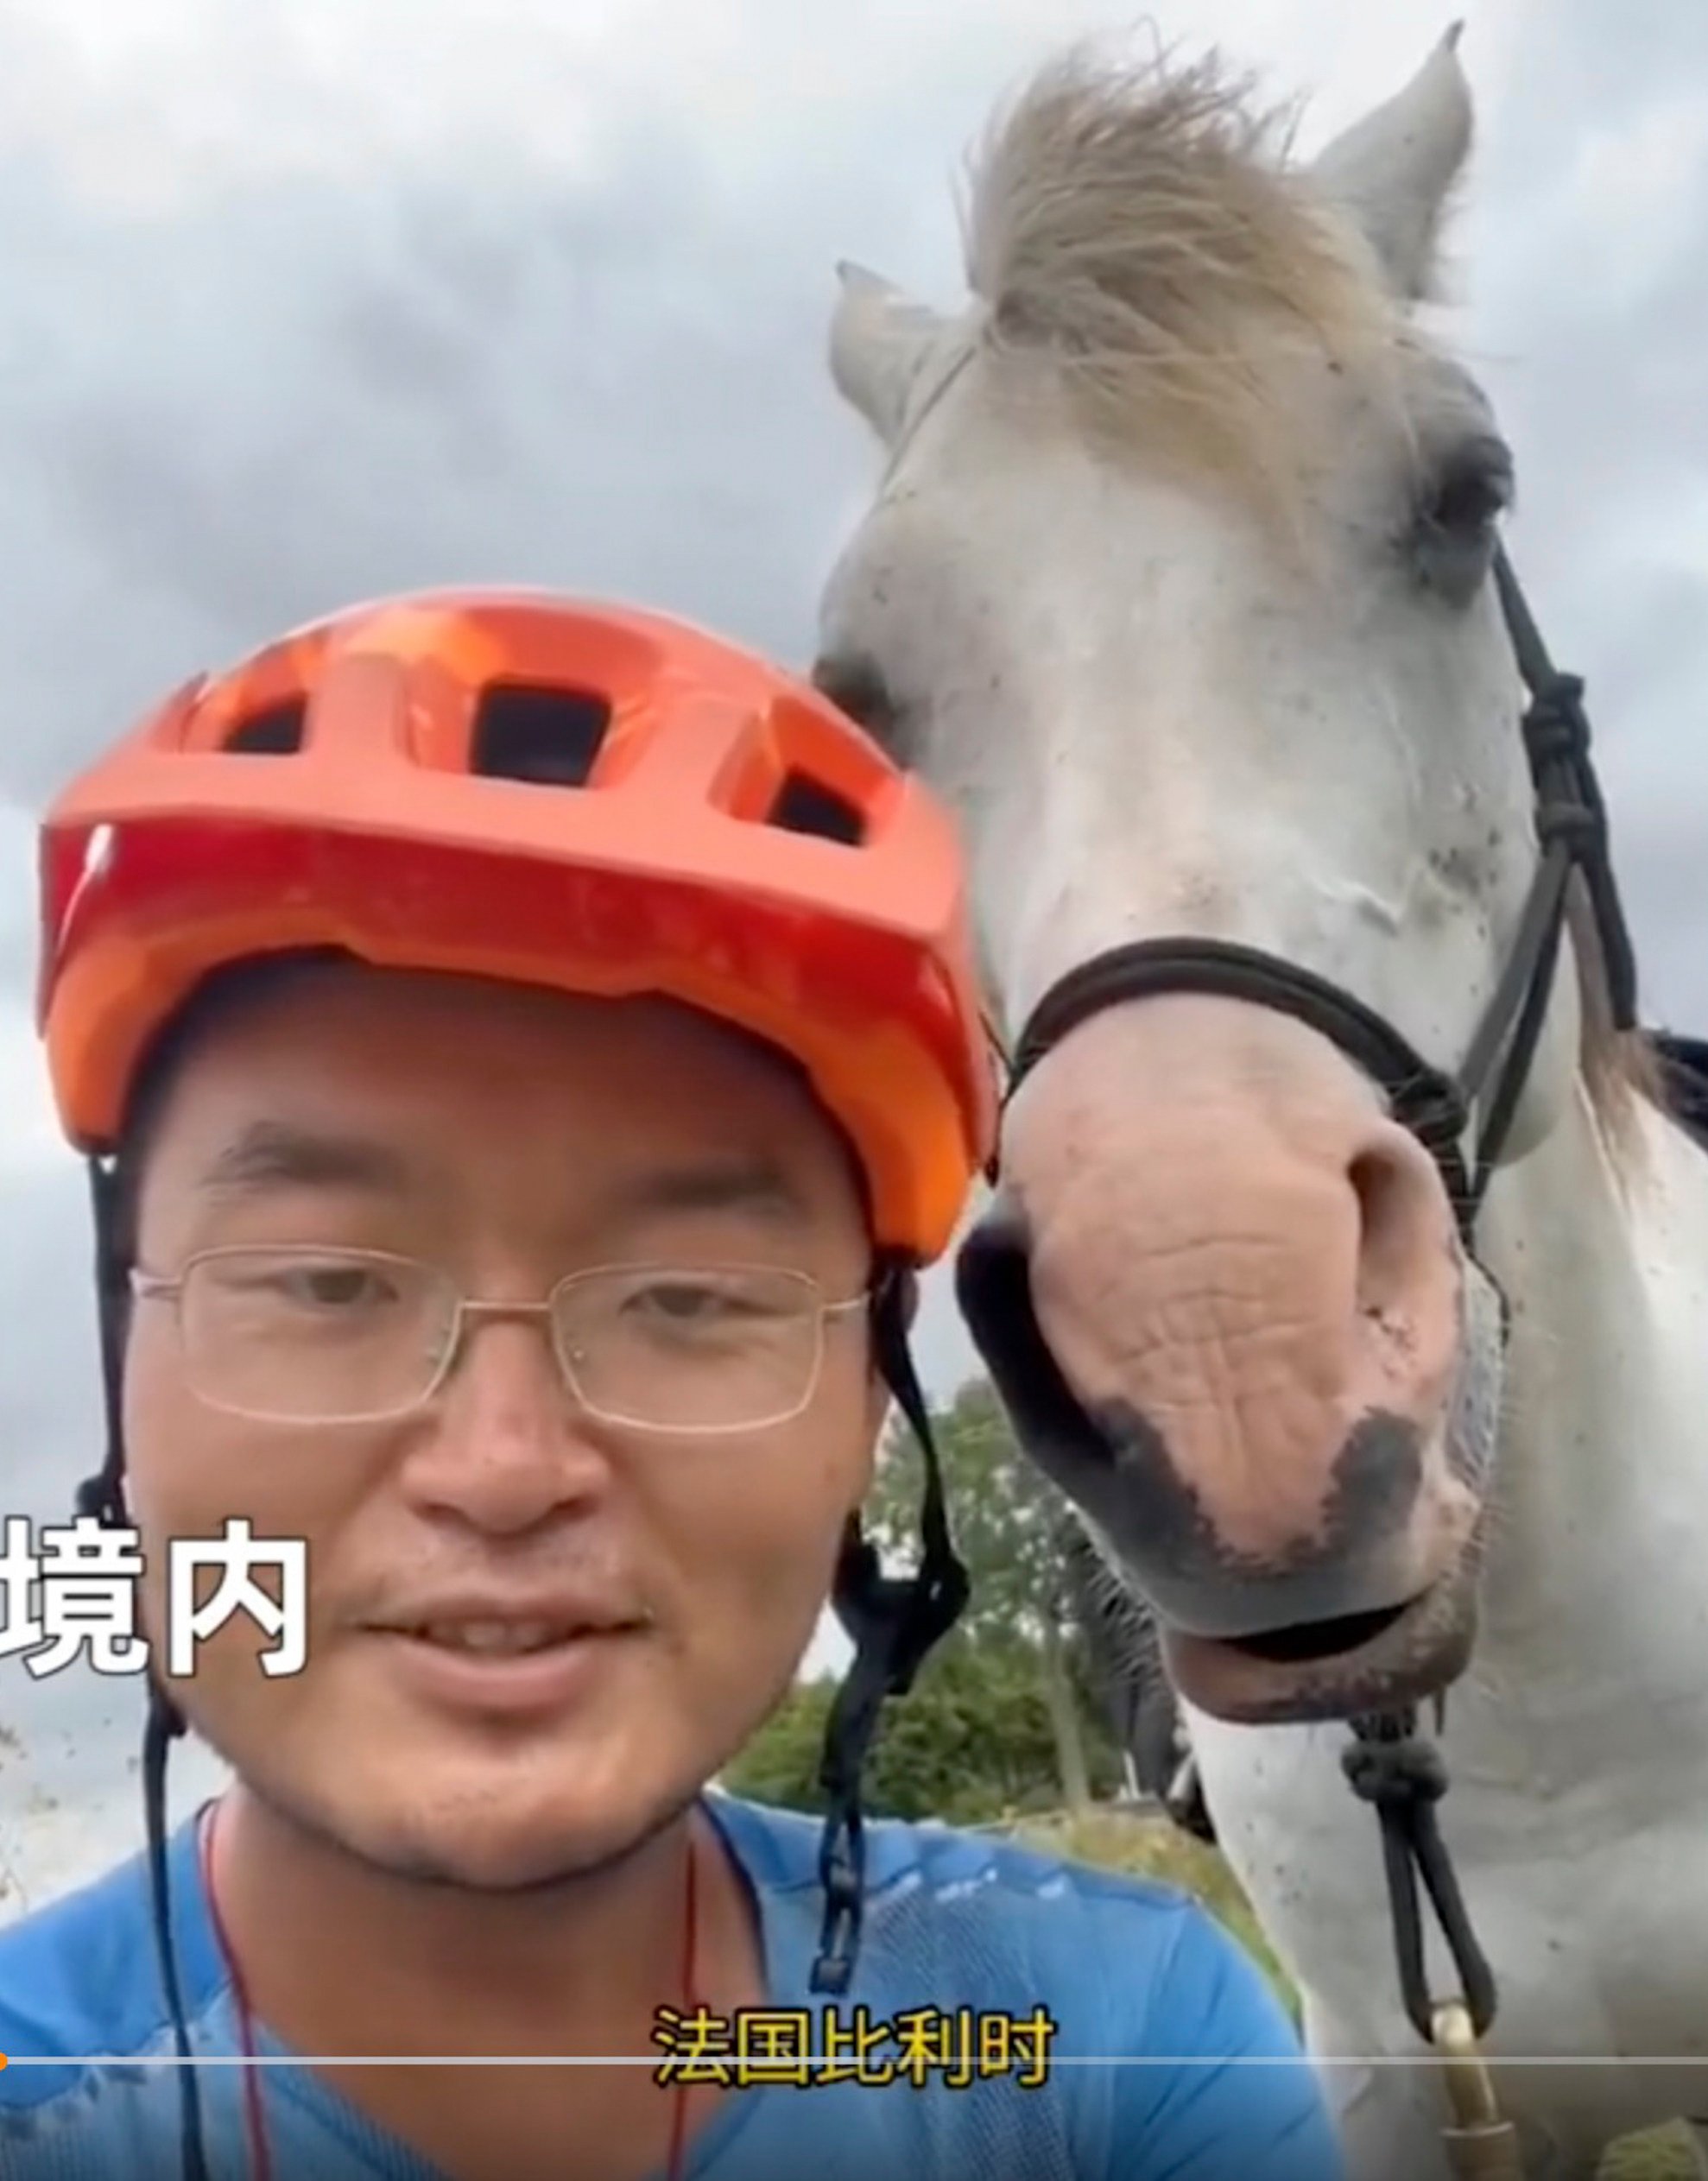 Xu says he will accept the outcome of the vet's follow up examination, even if it means the end of his horseback journey.  Photo: Weibo